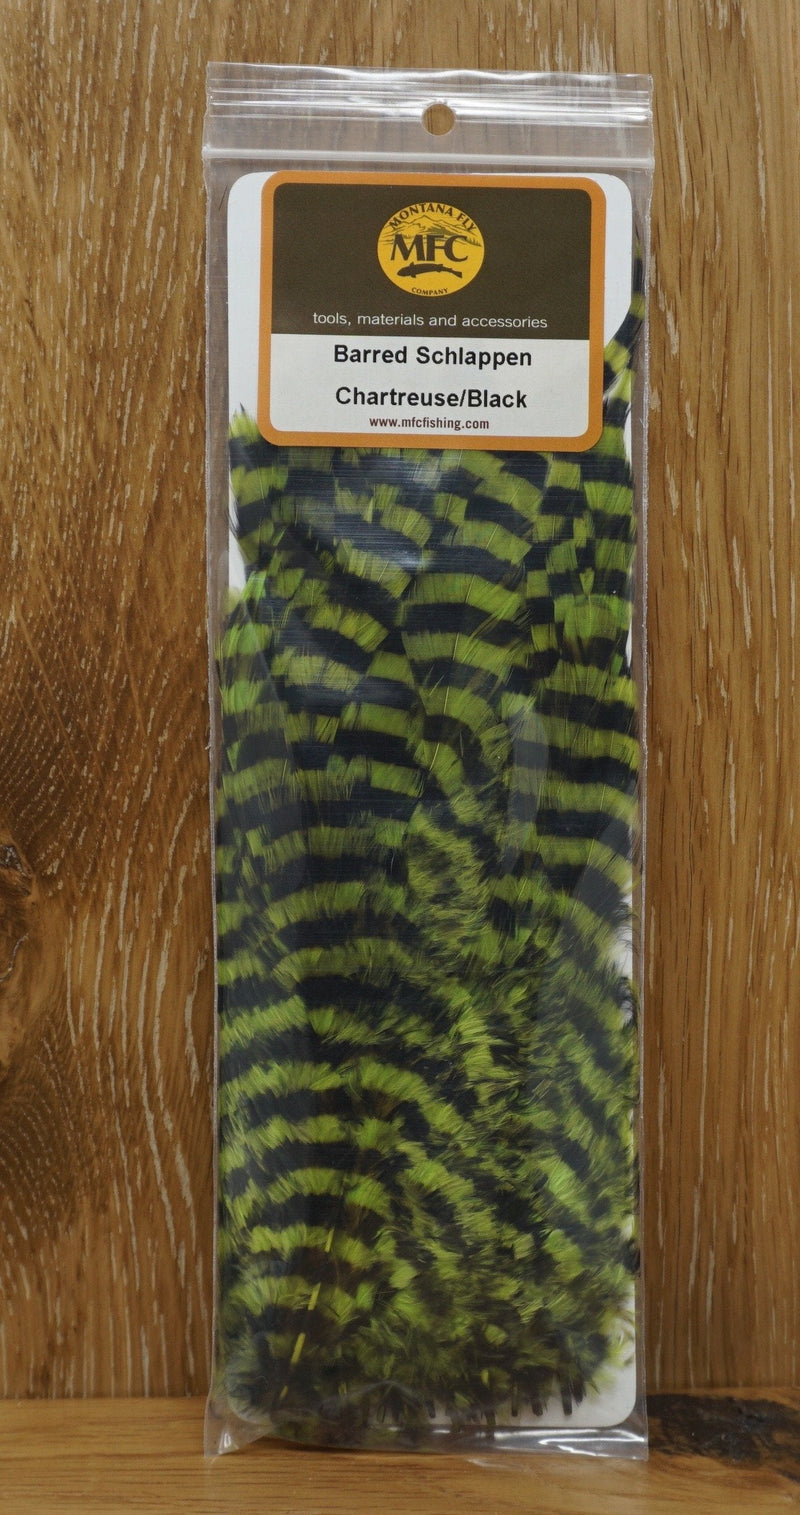 MFC Barred Schlappen Chartreuse/Black